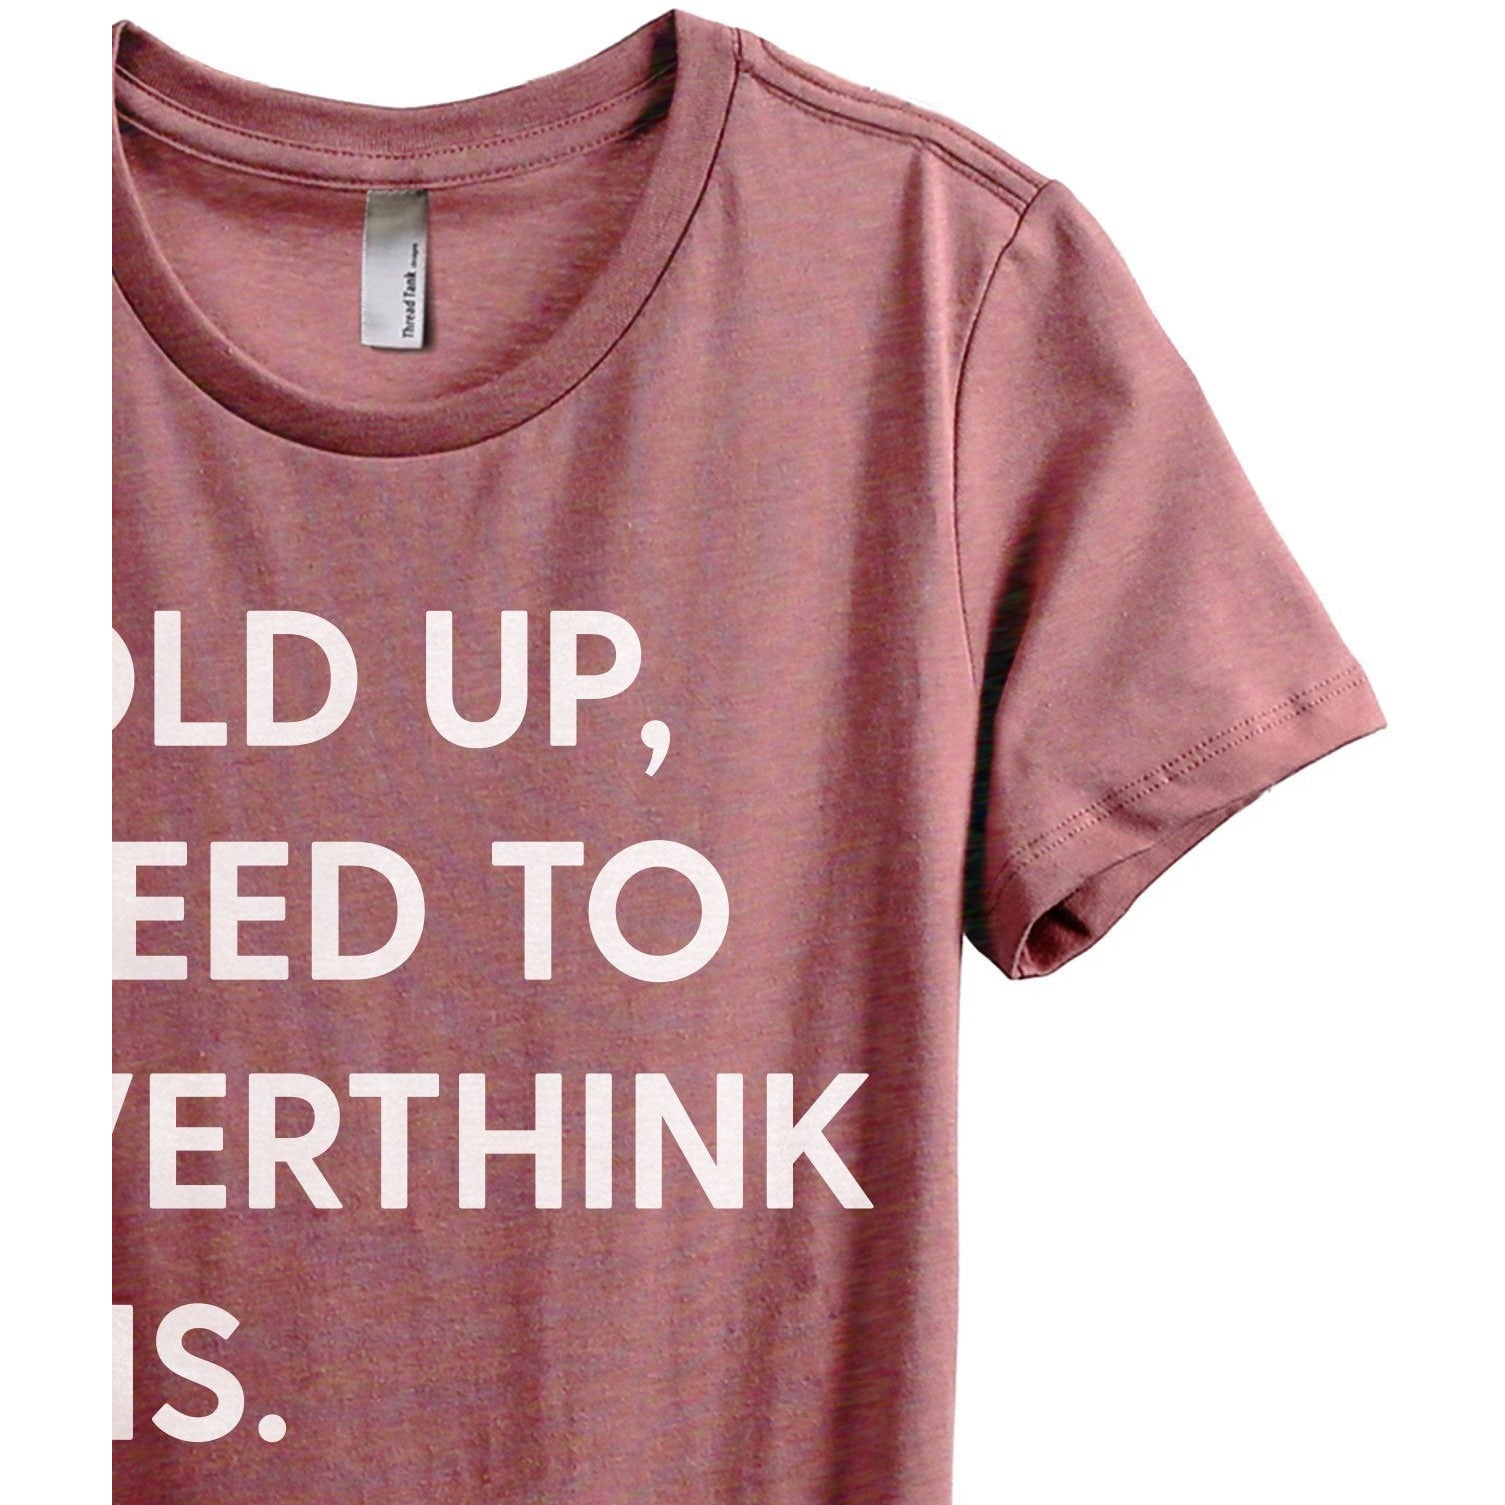 Hold Up, I Need To Rethink This Women's Relaxed Crewneck T-Shirt Top Tee Heather Rouge Zoom Details
